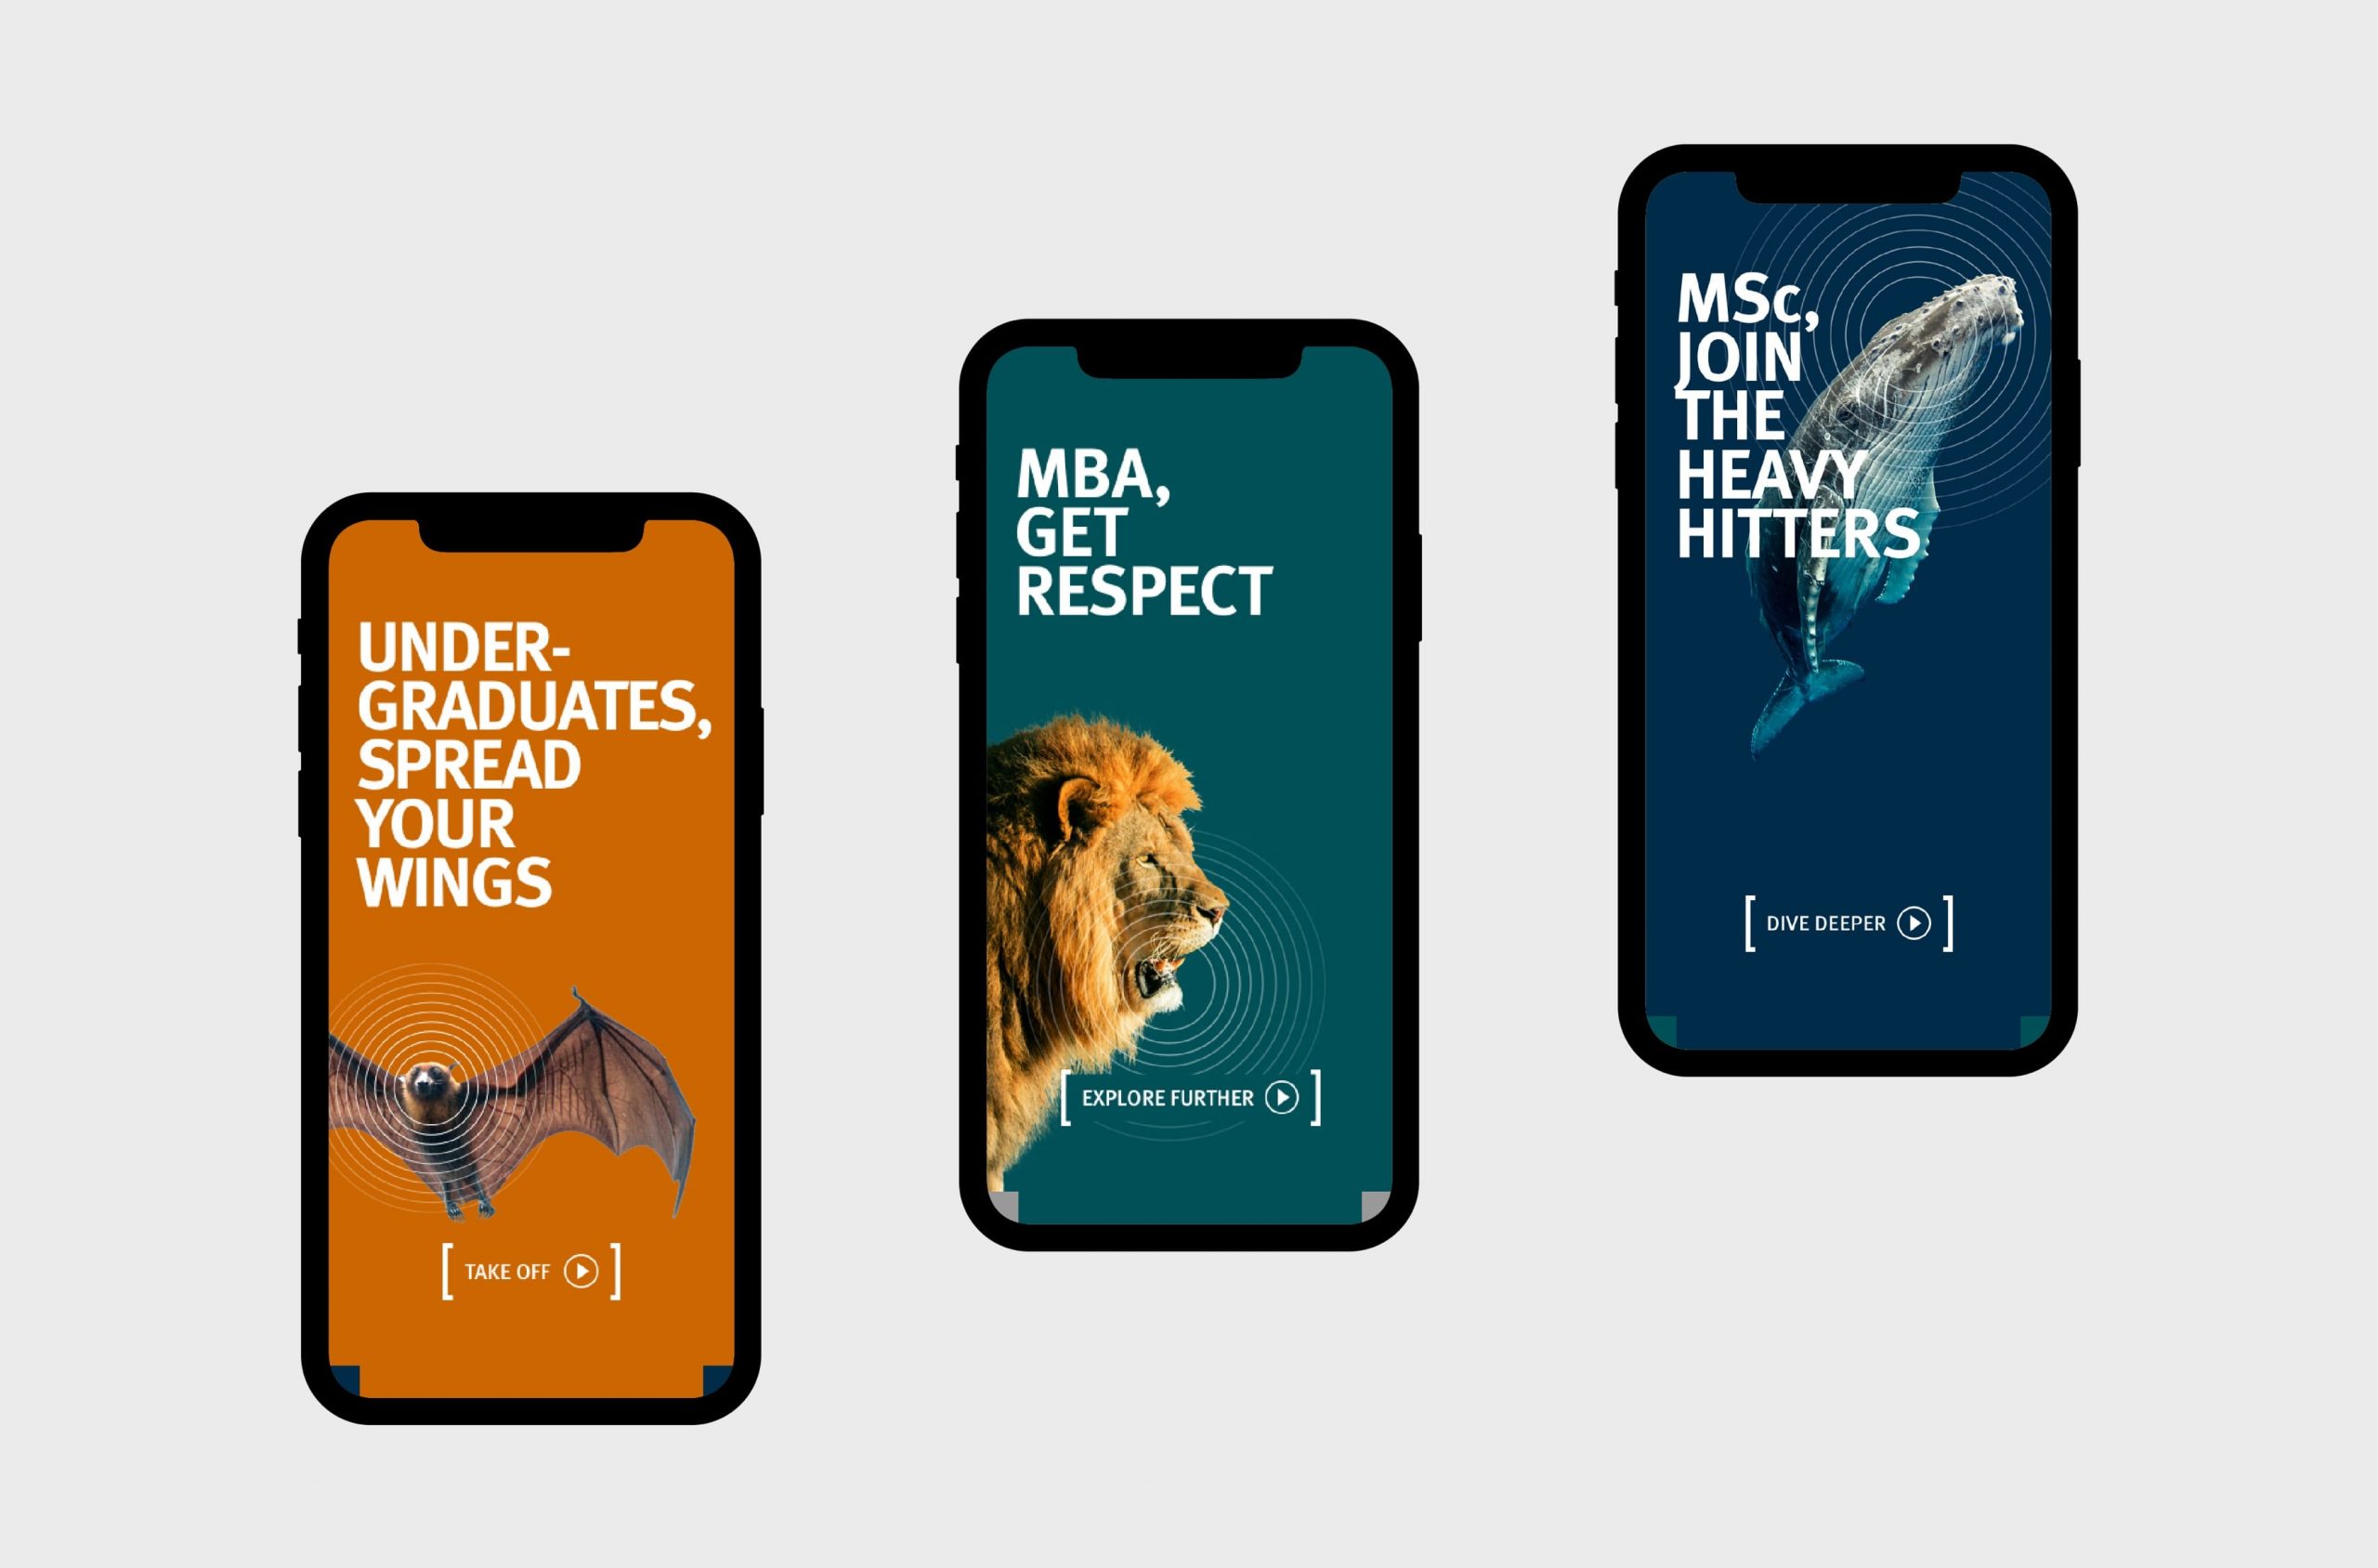 Cass Business School, microsite, on three mobile phones. Bat 'Undergraduates, spread your wings', Lion 'MBA, get respect', Whale MSc, join the heavy hitters'